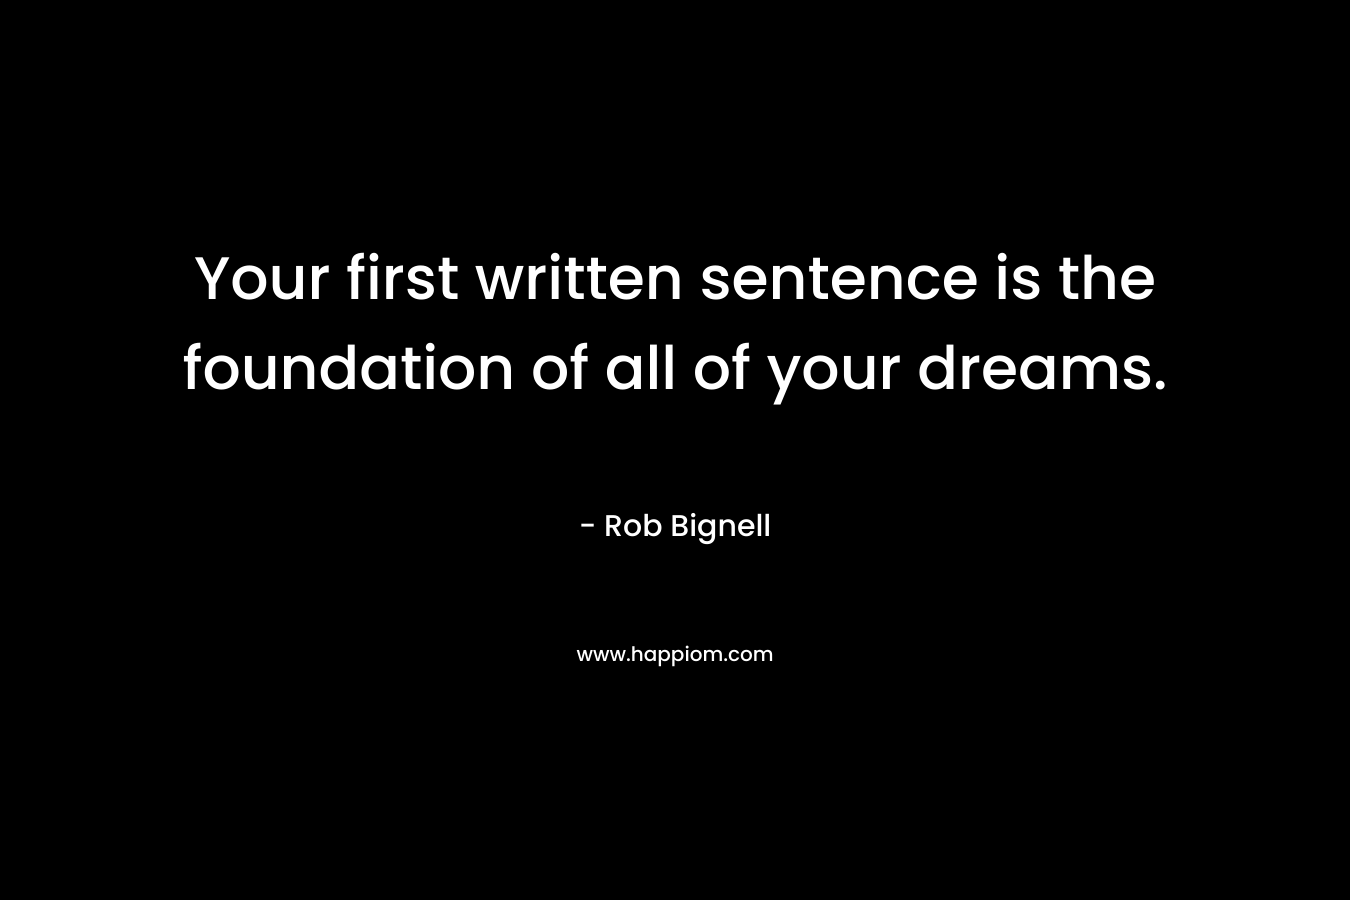 Your first written sentence is the foundation of all of your dreams.